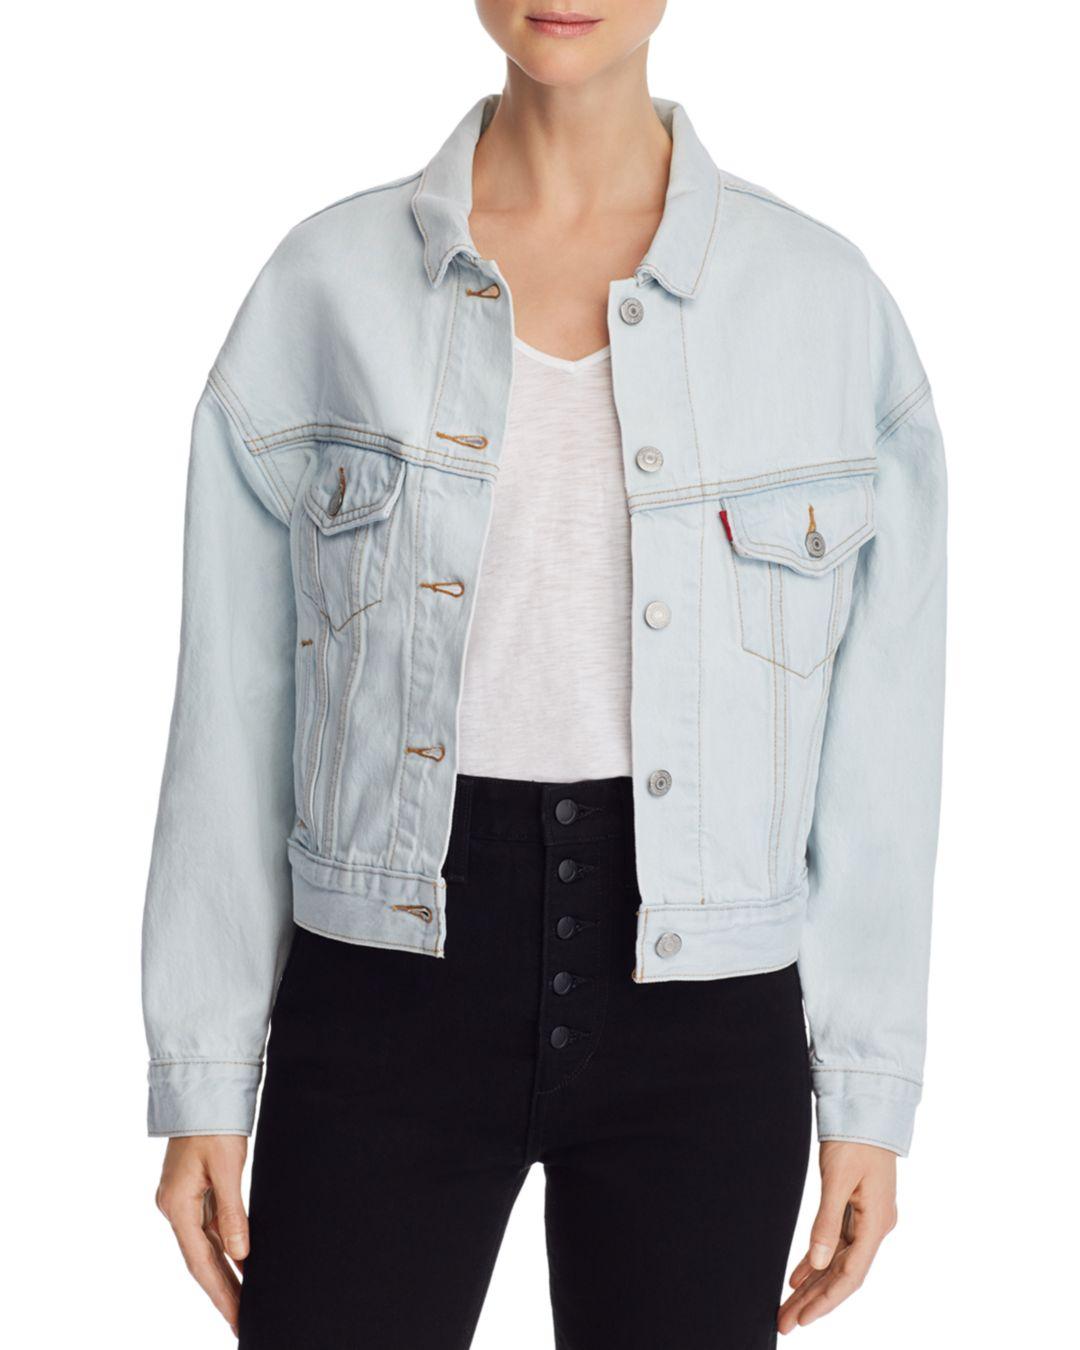 levi's slouch denim trucker jacket Cheaper Than Retail Price> Buy Clothing,  Accessories and lifestyle products for women & men -